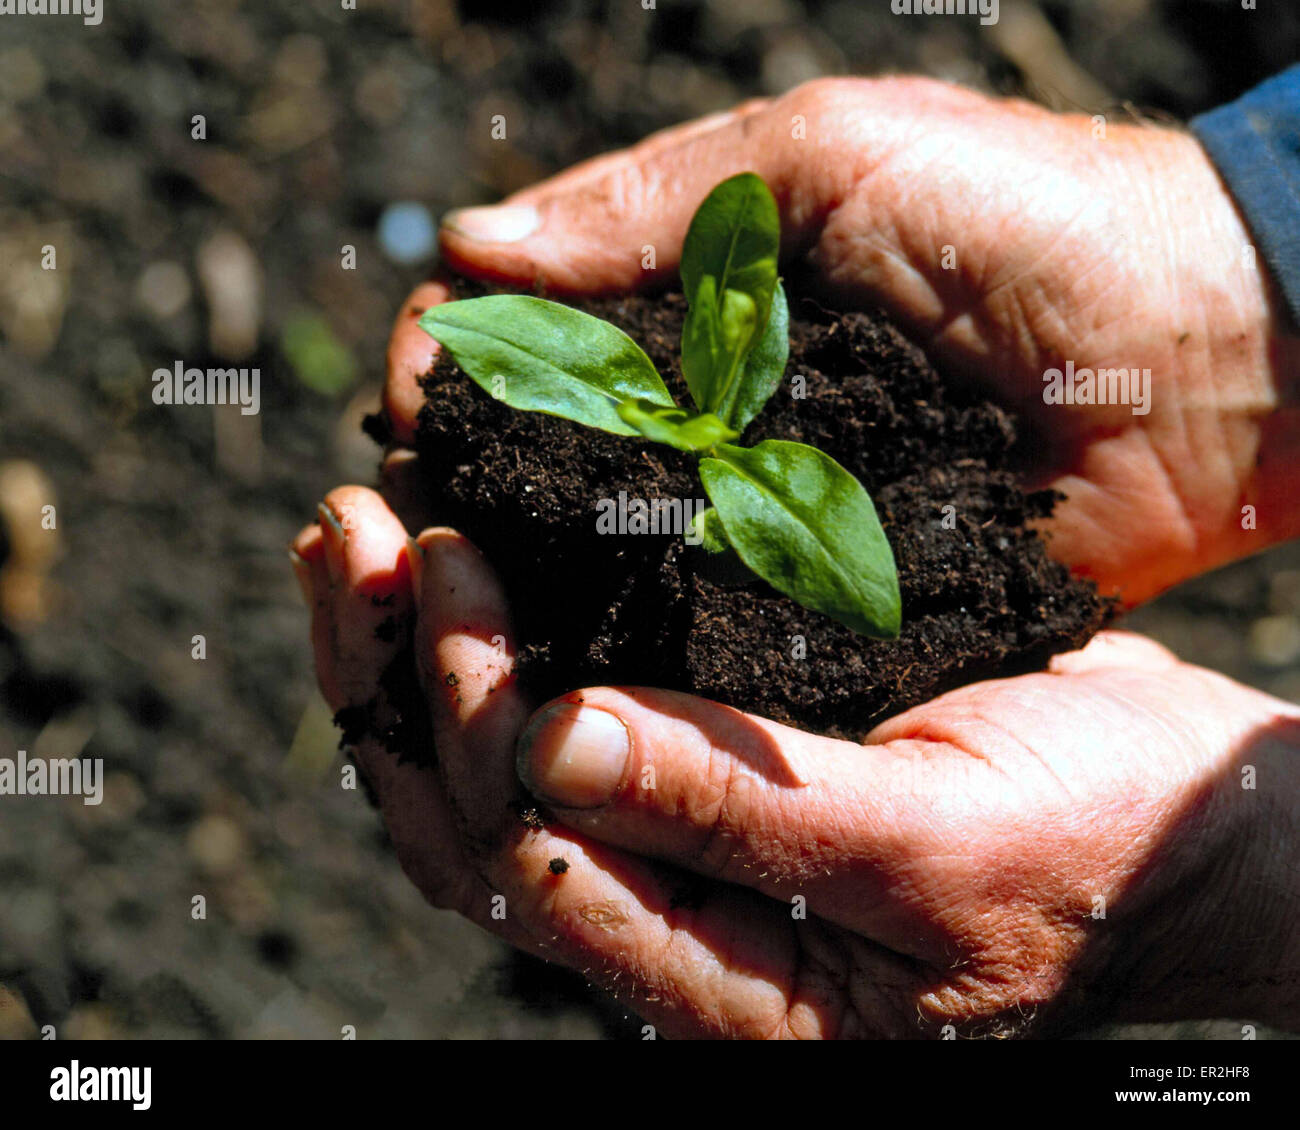 man, hands, earth, plants, hold, symbol, nature, ecology, environment, protection, welfare, responsibility, growth, sprout, seed Stock Photo